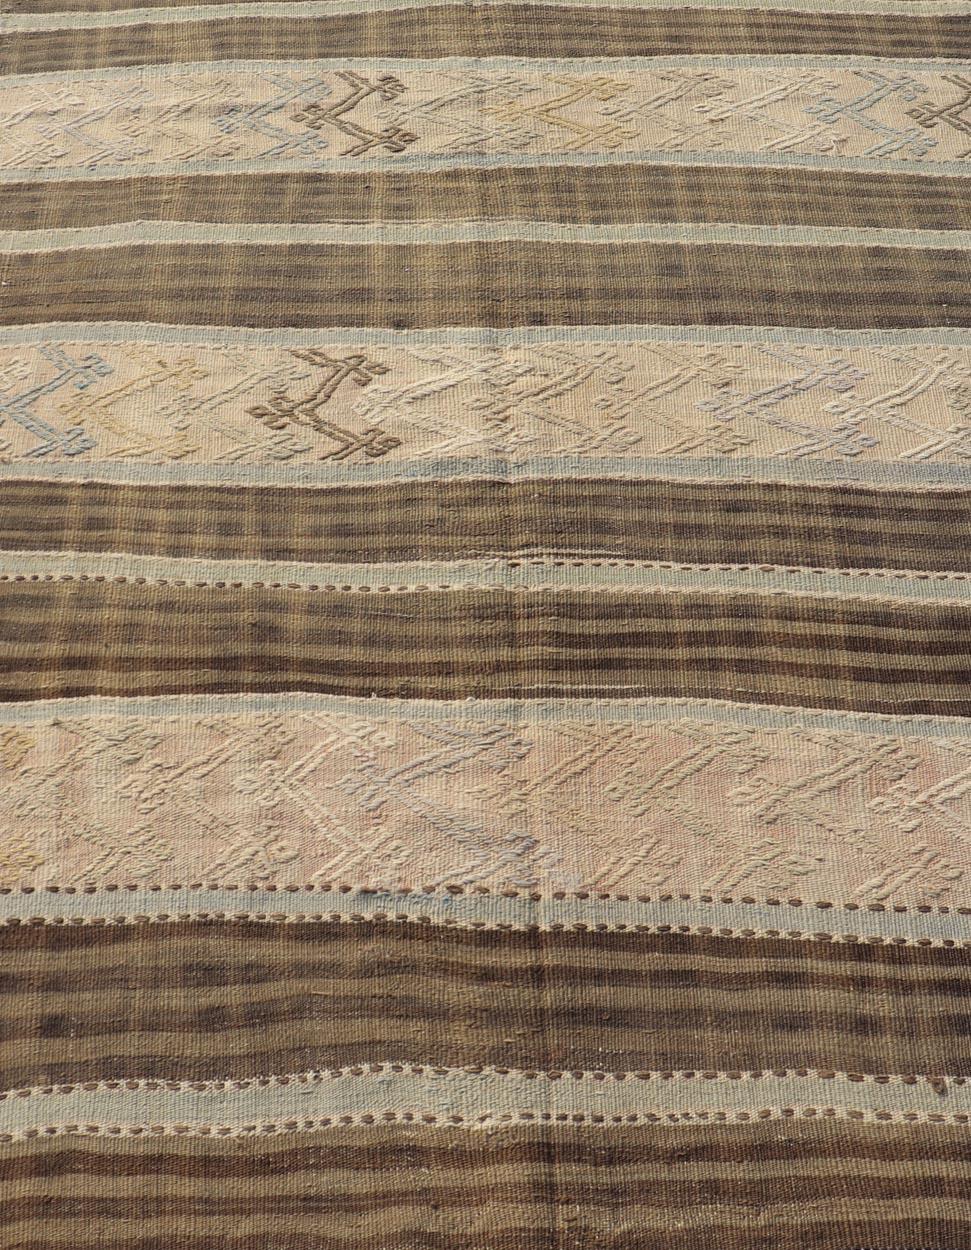 Hand-Woven Vintage Turkish Flat-Weave Striped Kilim in Taupe, Brown, and Light Blue For Sale